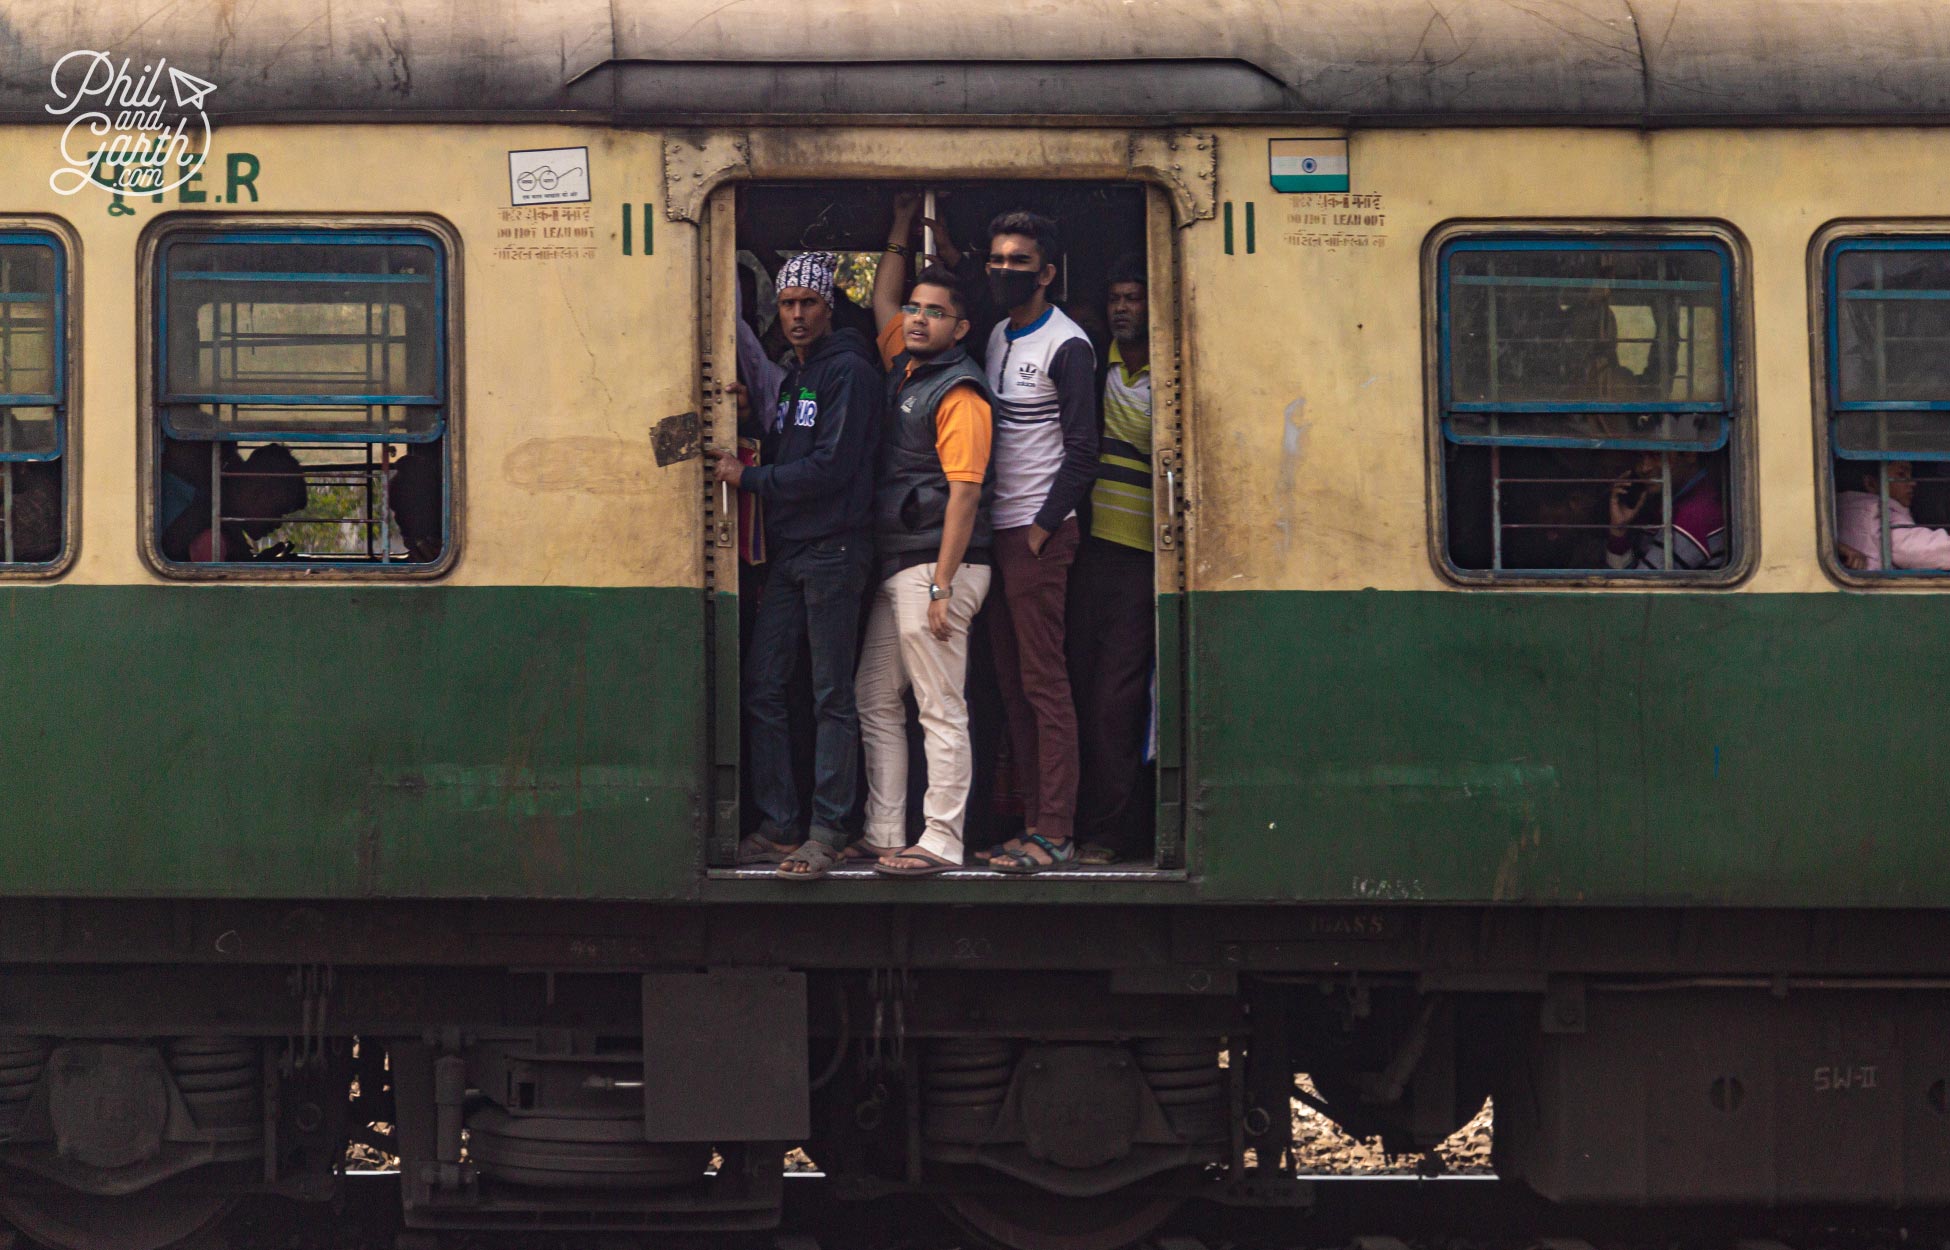 A commuter train into Kolkata - the closet sight we saw to people hanging out of trains